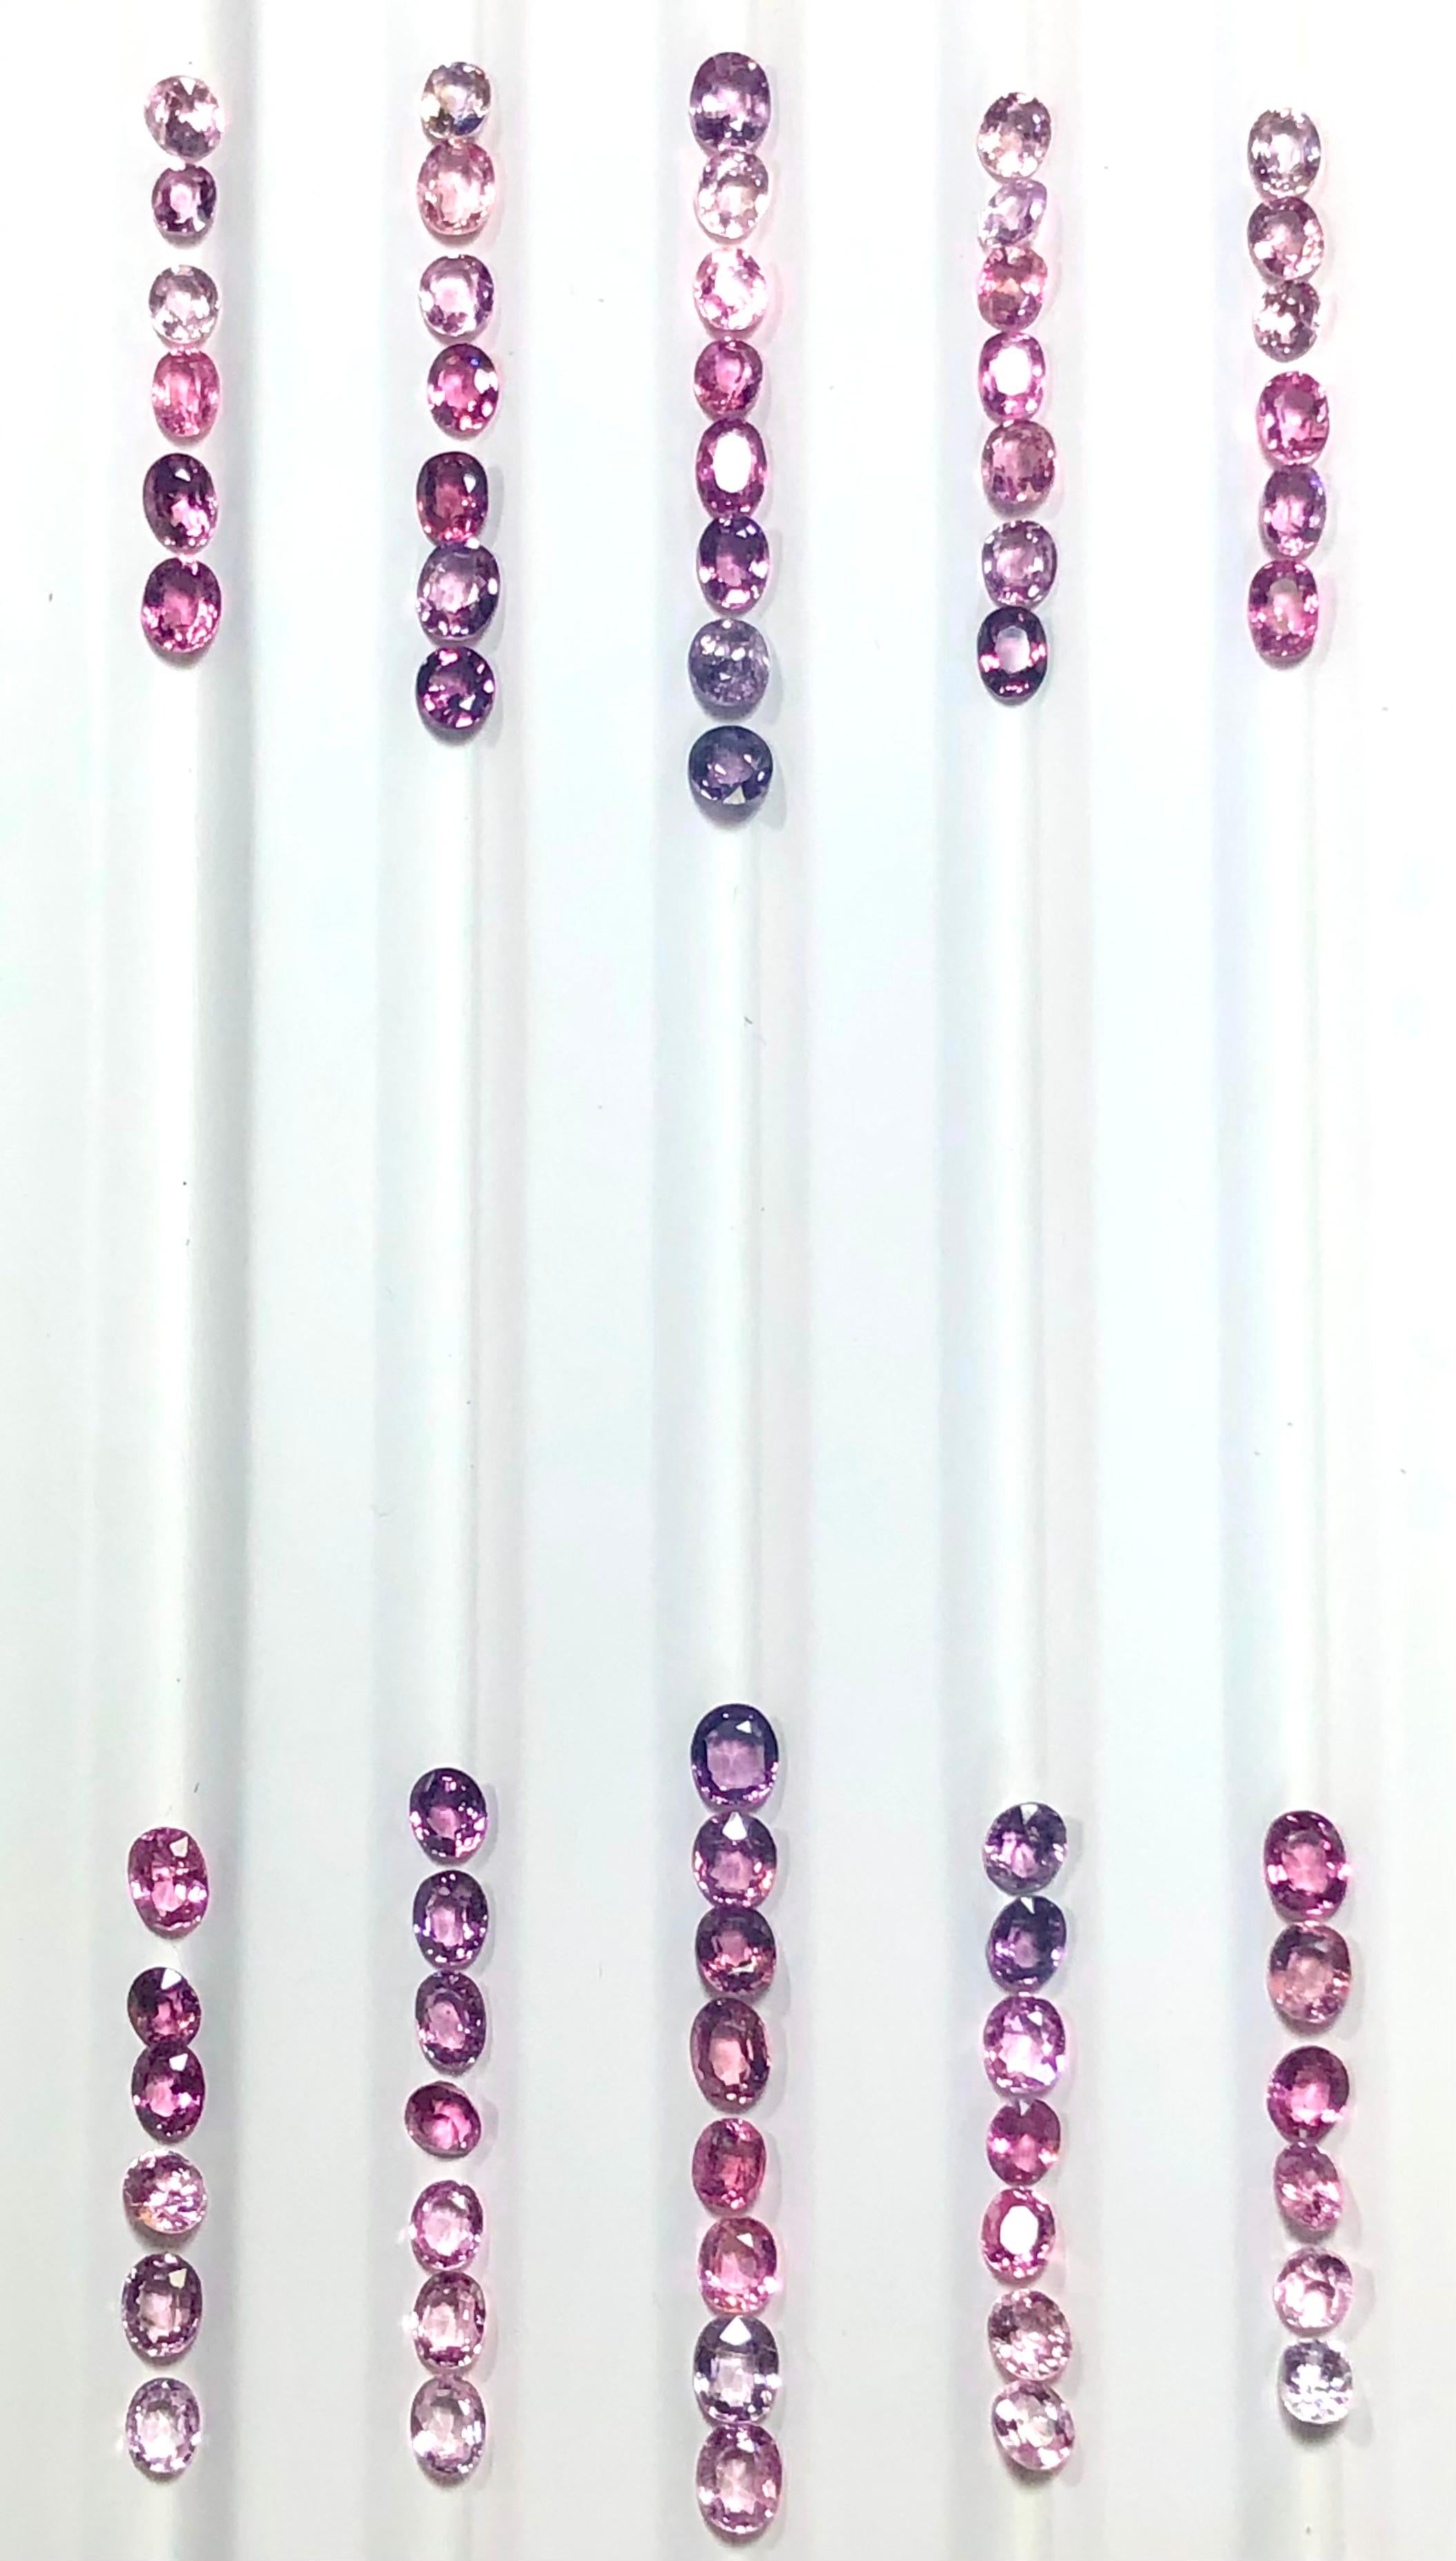 
Spinel fancy 100% natural oval loose gems set palette from baby pink to hot pink and violet to purple. Set weighing 54.5 carats, offered loose for sensational waterfall earrings! 
Dimension approx 6.00mm x 5.00mm.
Cut: Oval. (68 loose